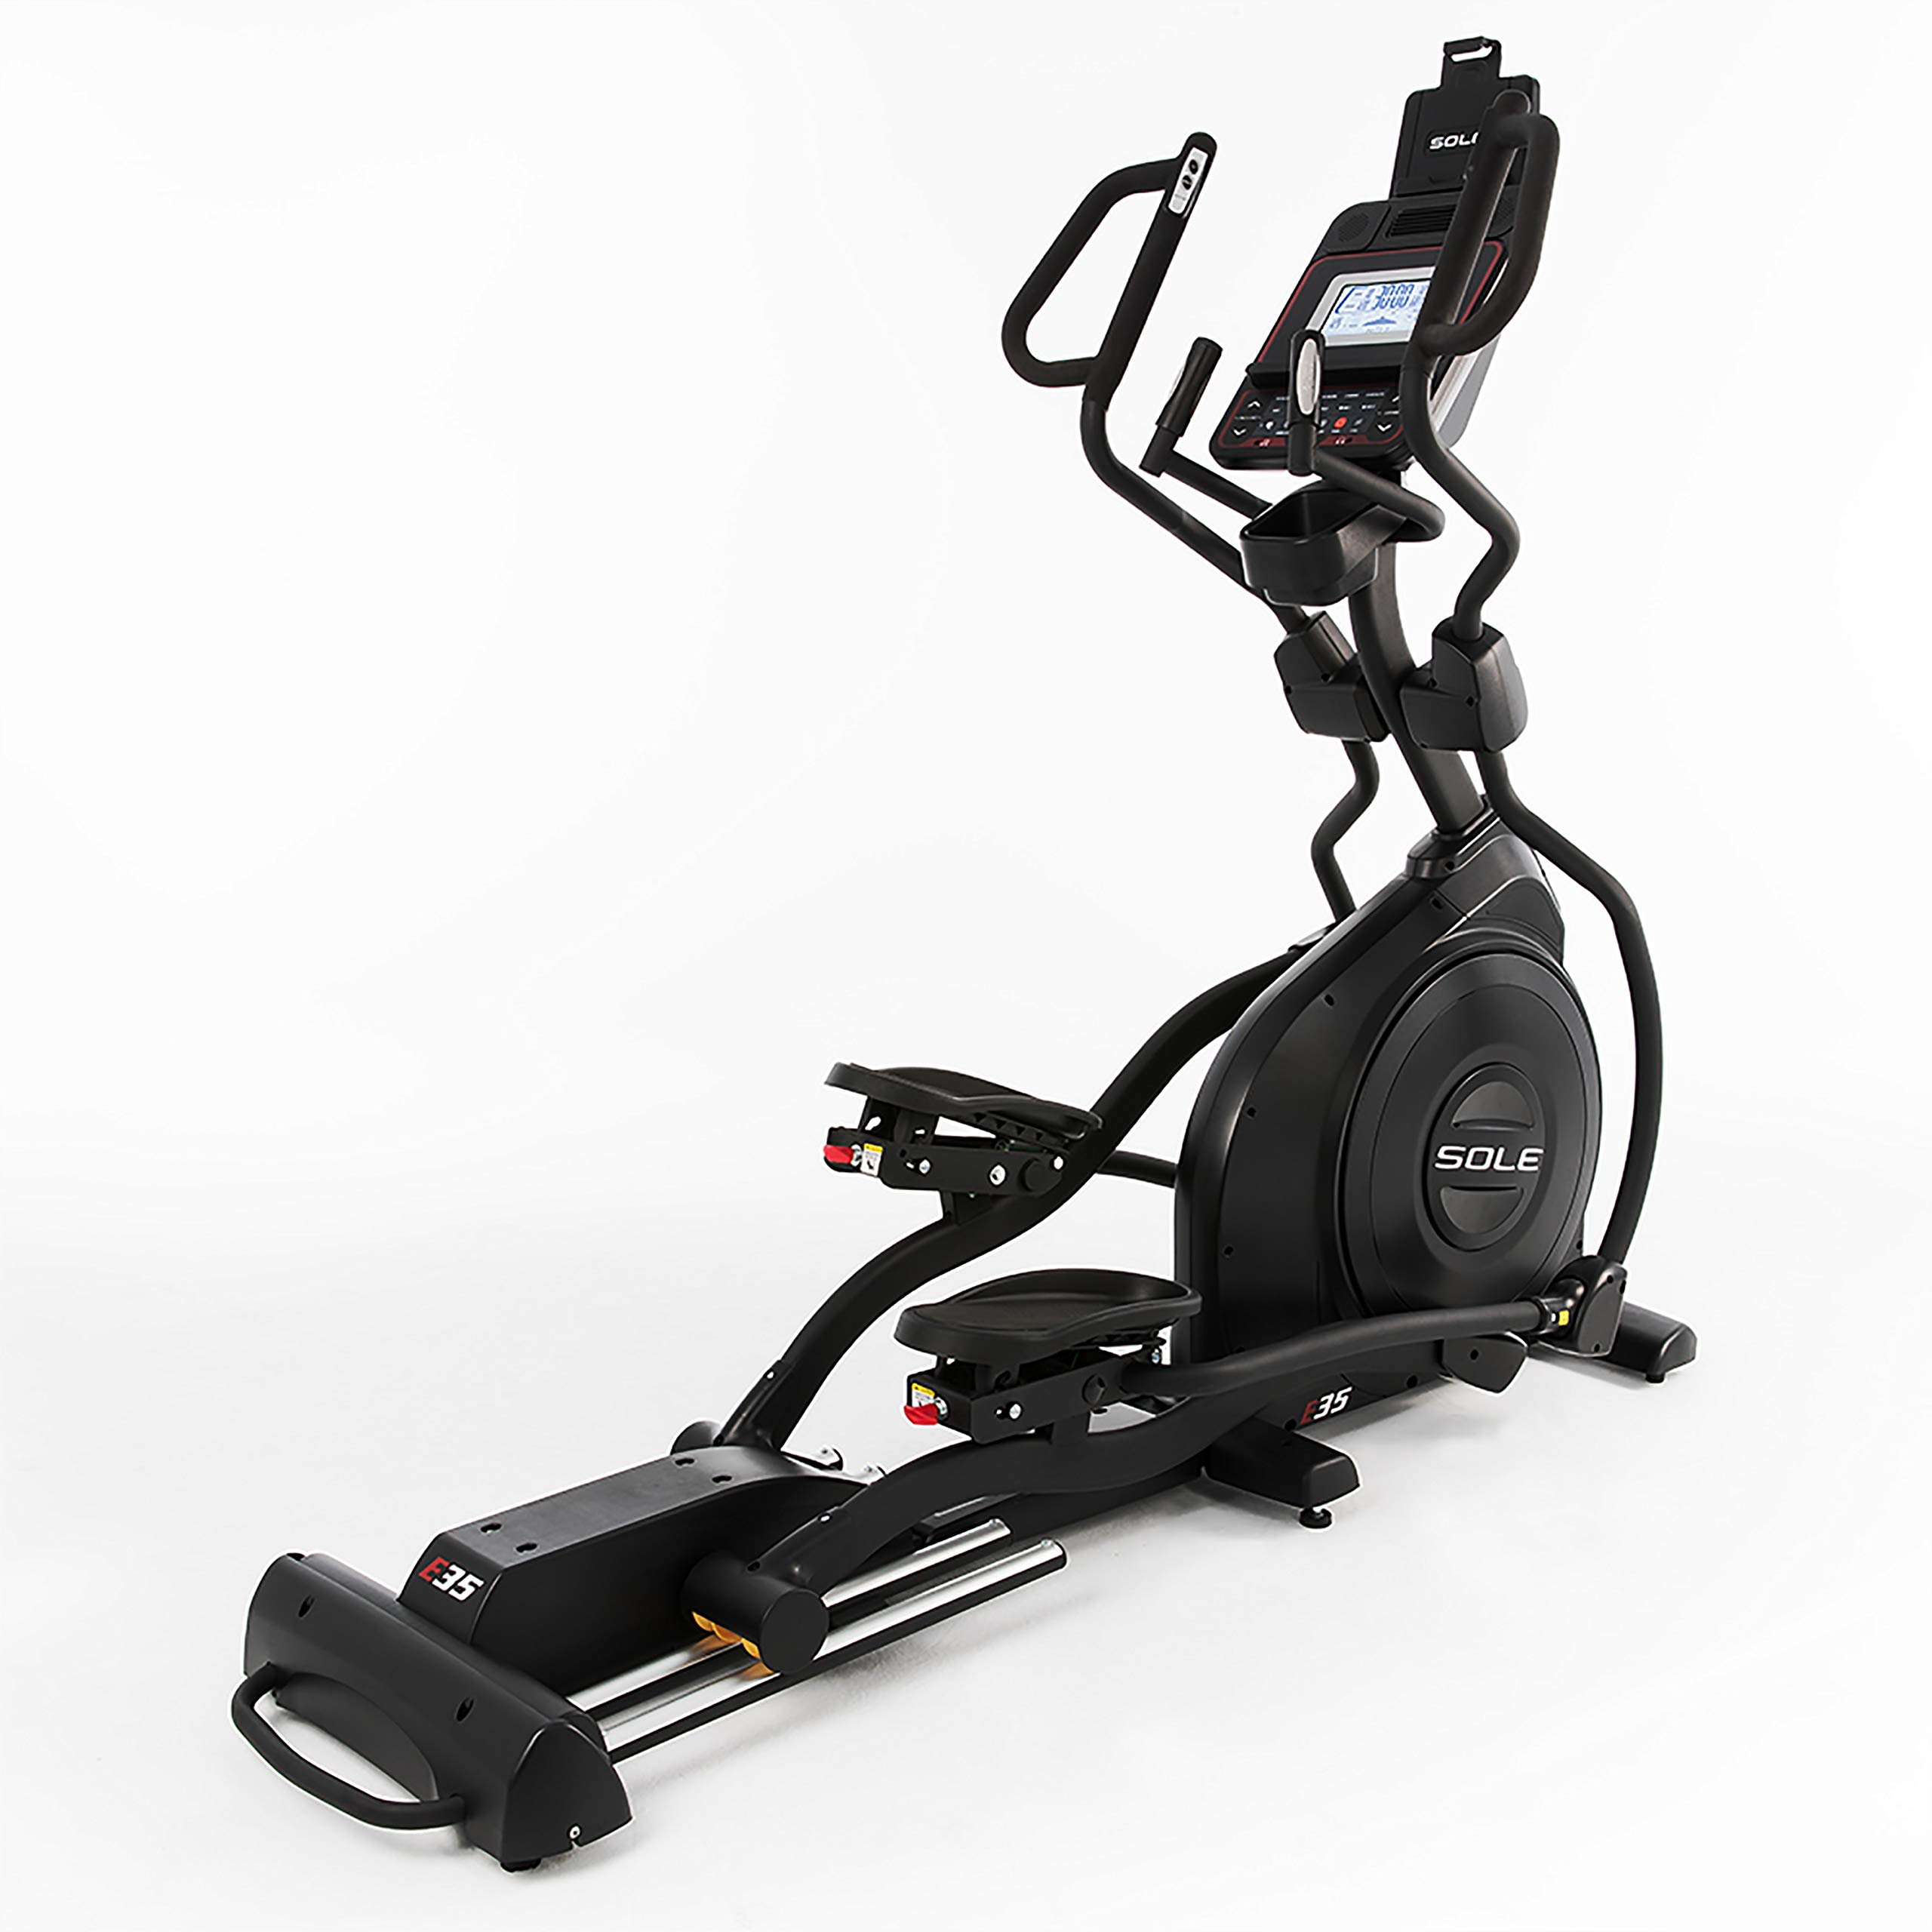 SOLE Fitness Elliptical Exercise Machines, Models E25, E35, E95, E95S, E98, Elliptical Machines for Home Use, Home Exercise Equipment for Cardio Training, Work from Home Fitness Stepper Machine>